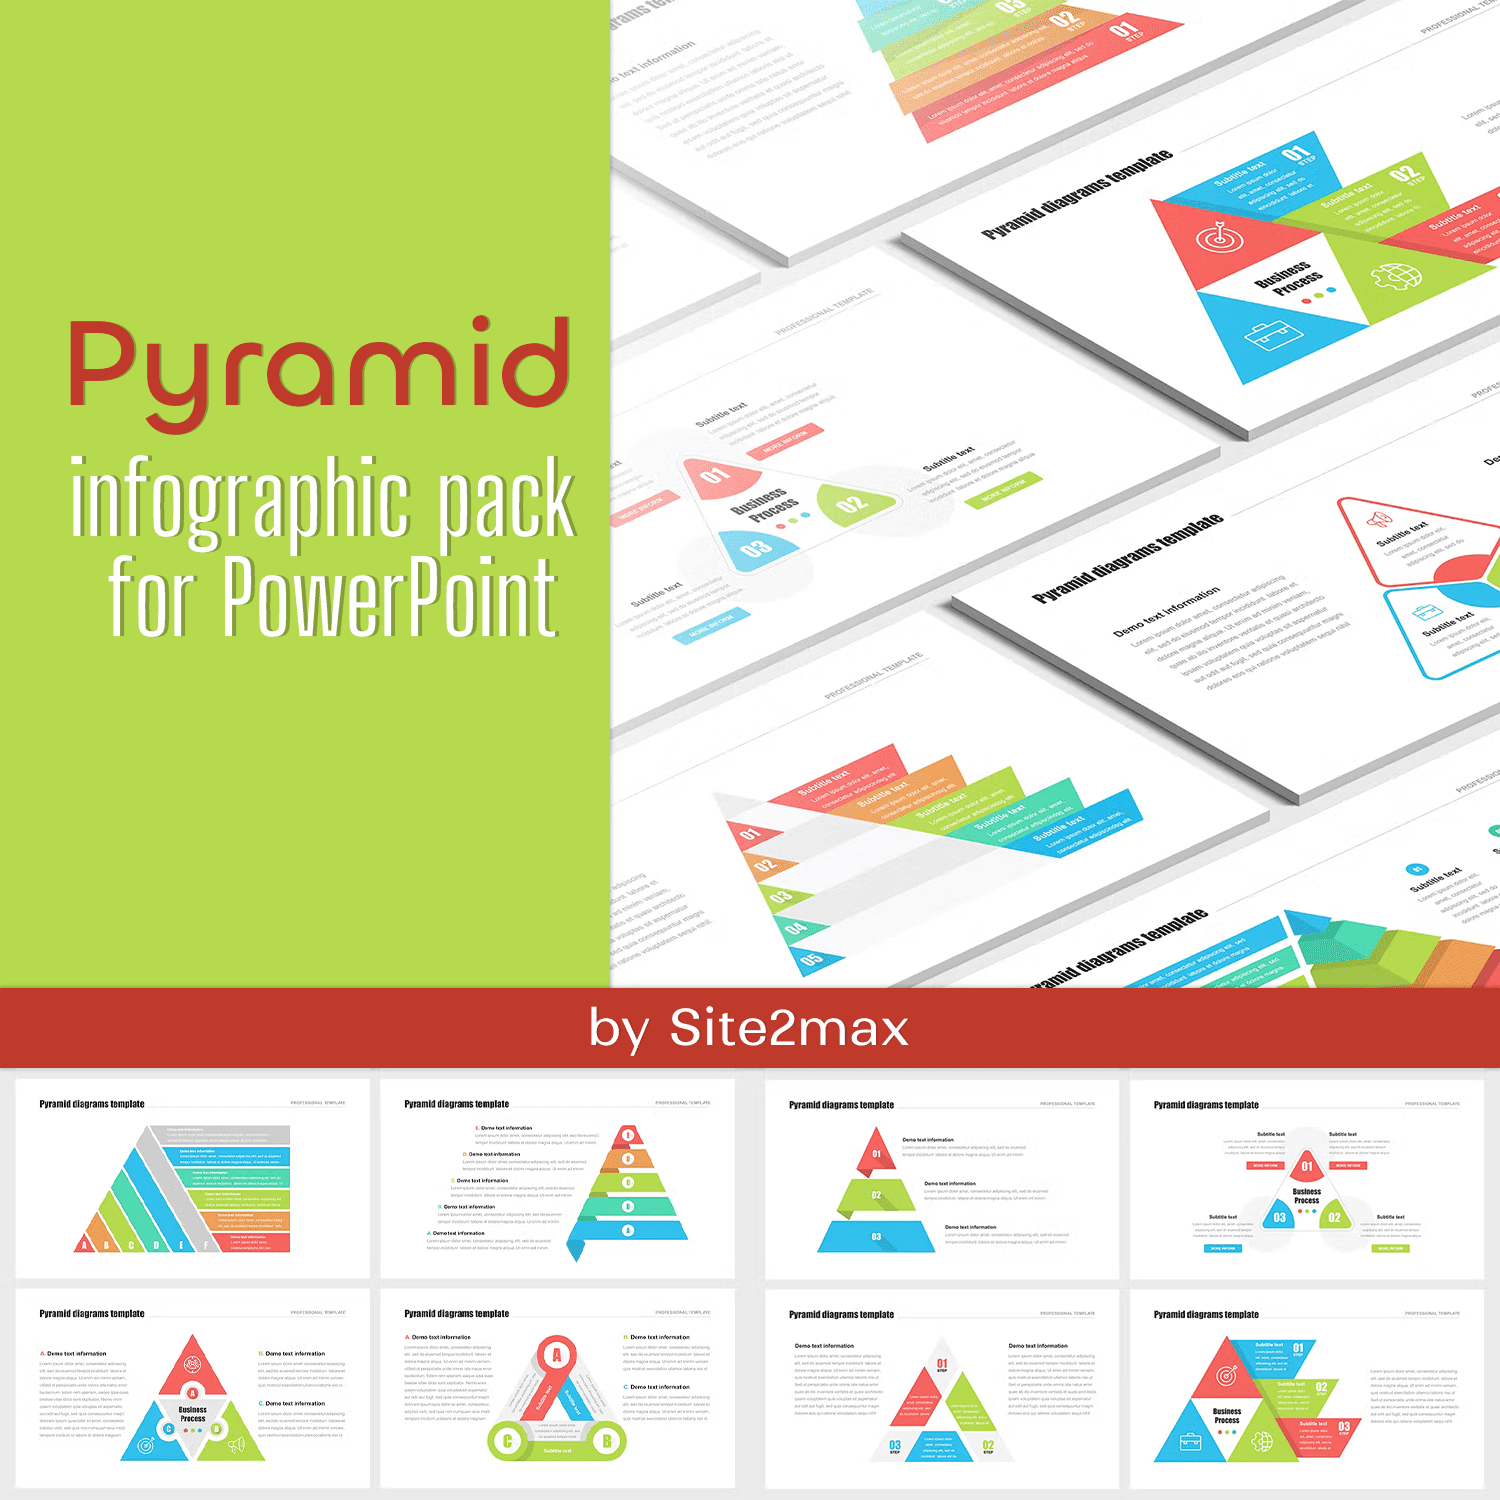 Pyramid Infographic Pack For PowerPoint.